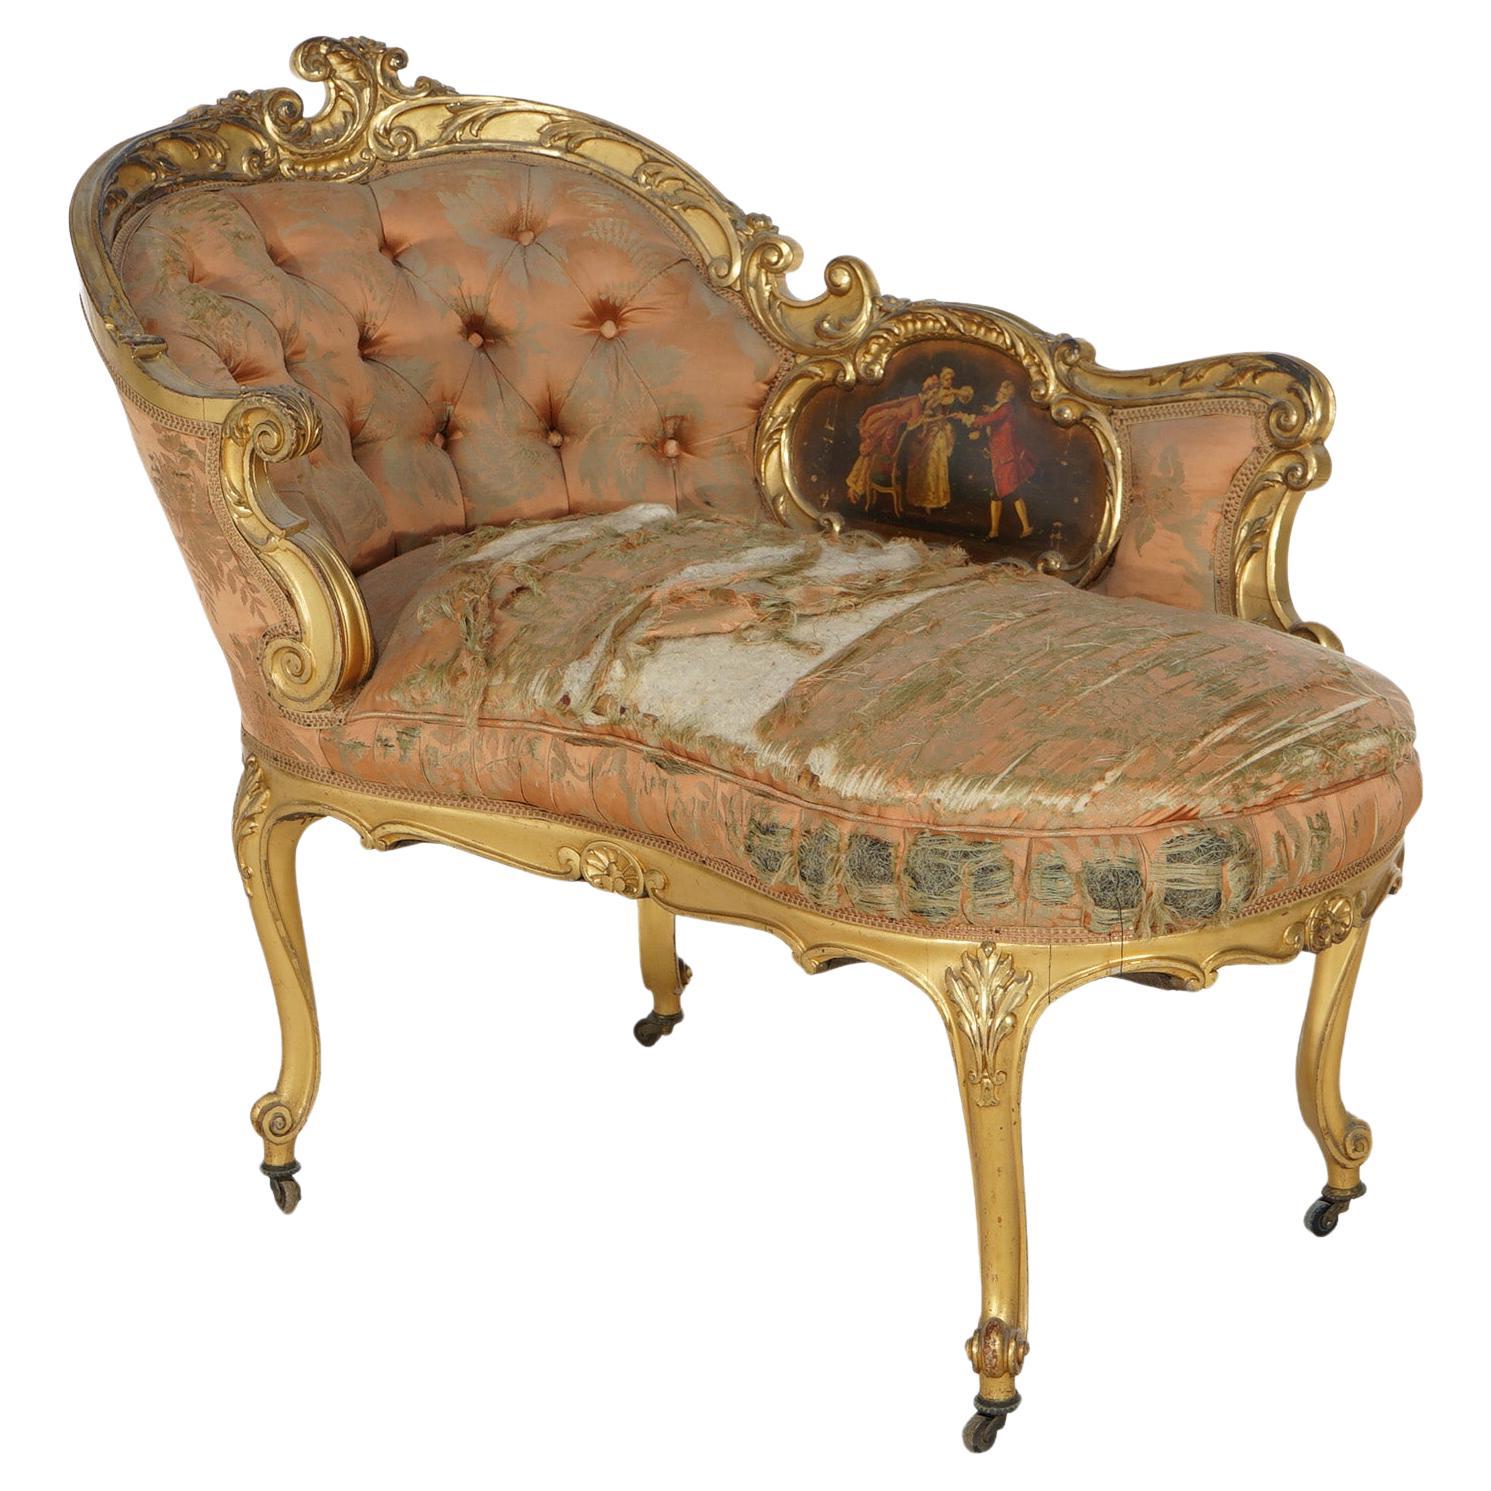 Early Antique French Rococo Vernis Martin & Giltwood Half-Recamier Settee 19th C For Sale